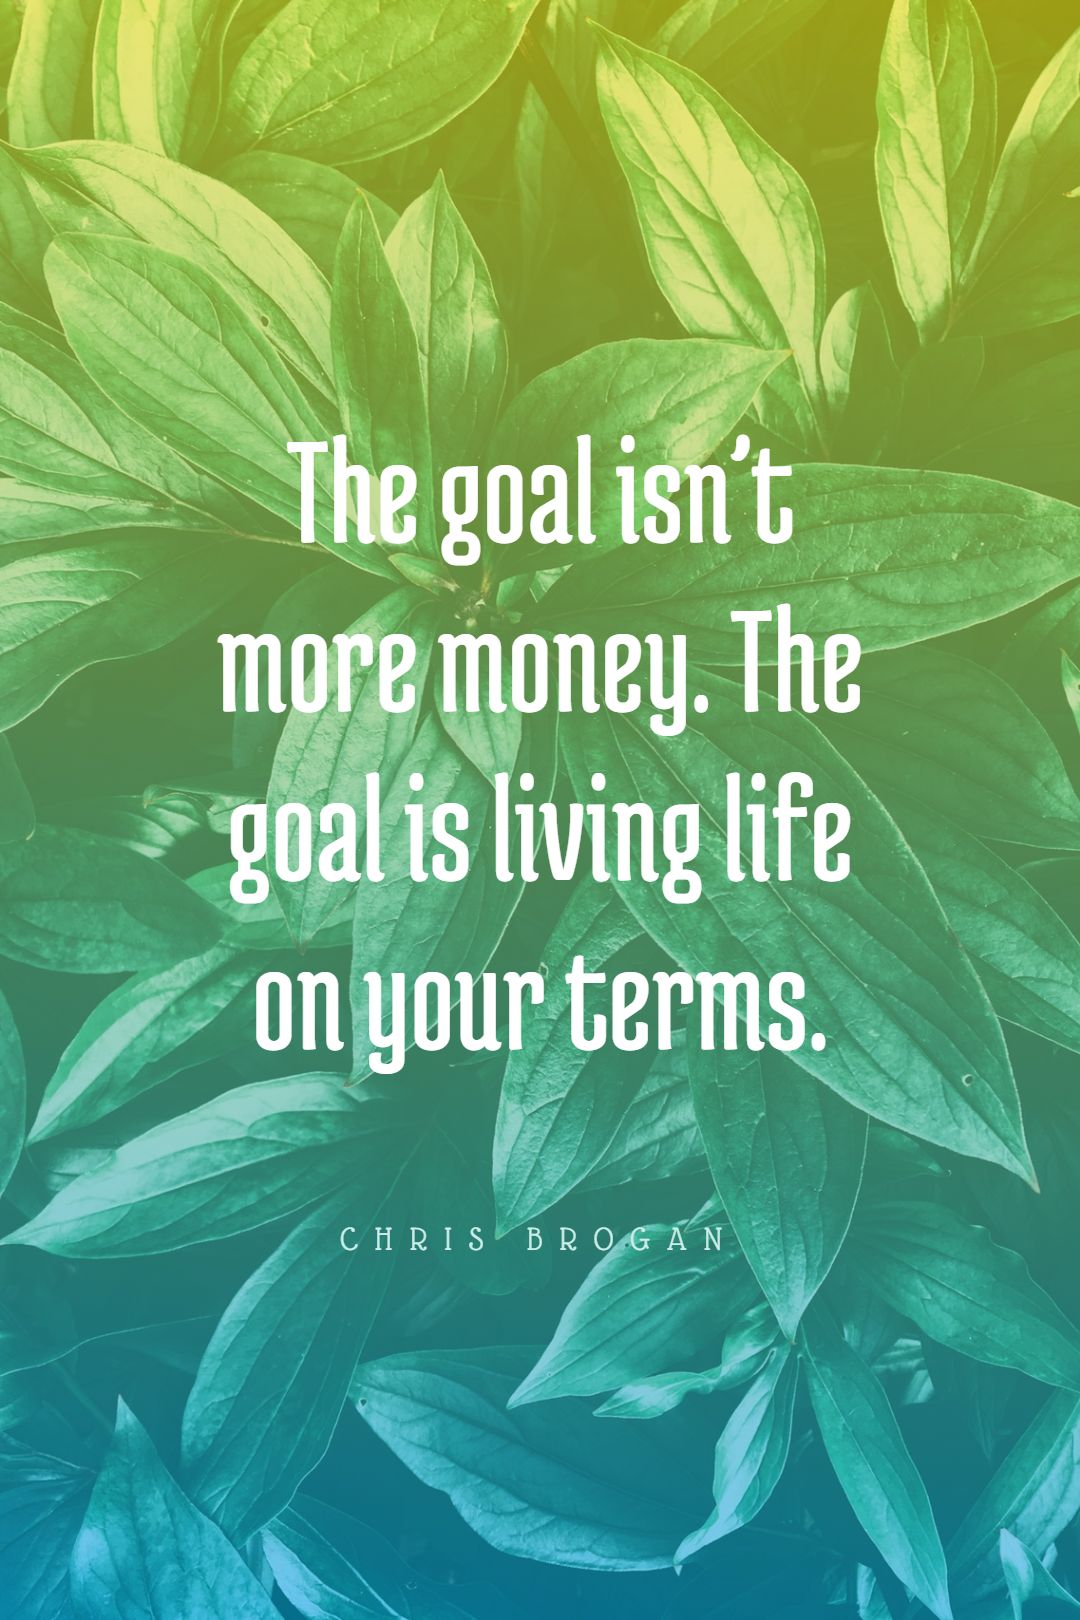 Quotes image of The goal isn’t more money. The goal is living life on your terms.